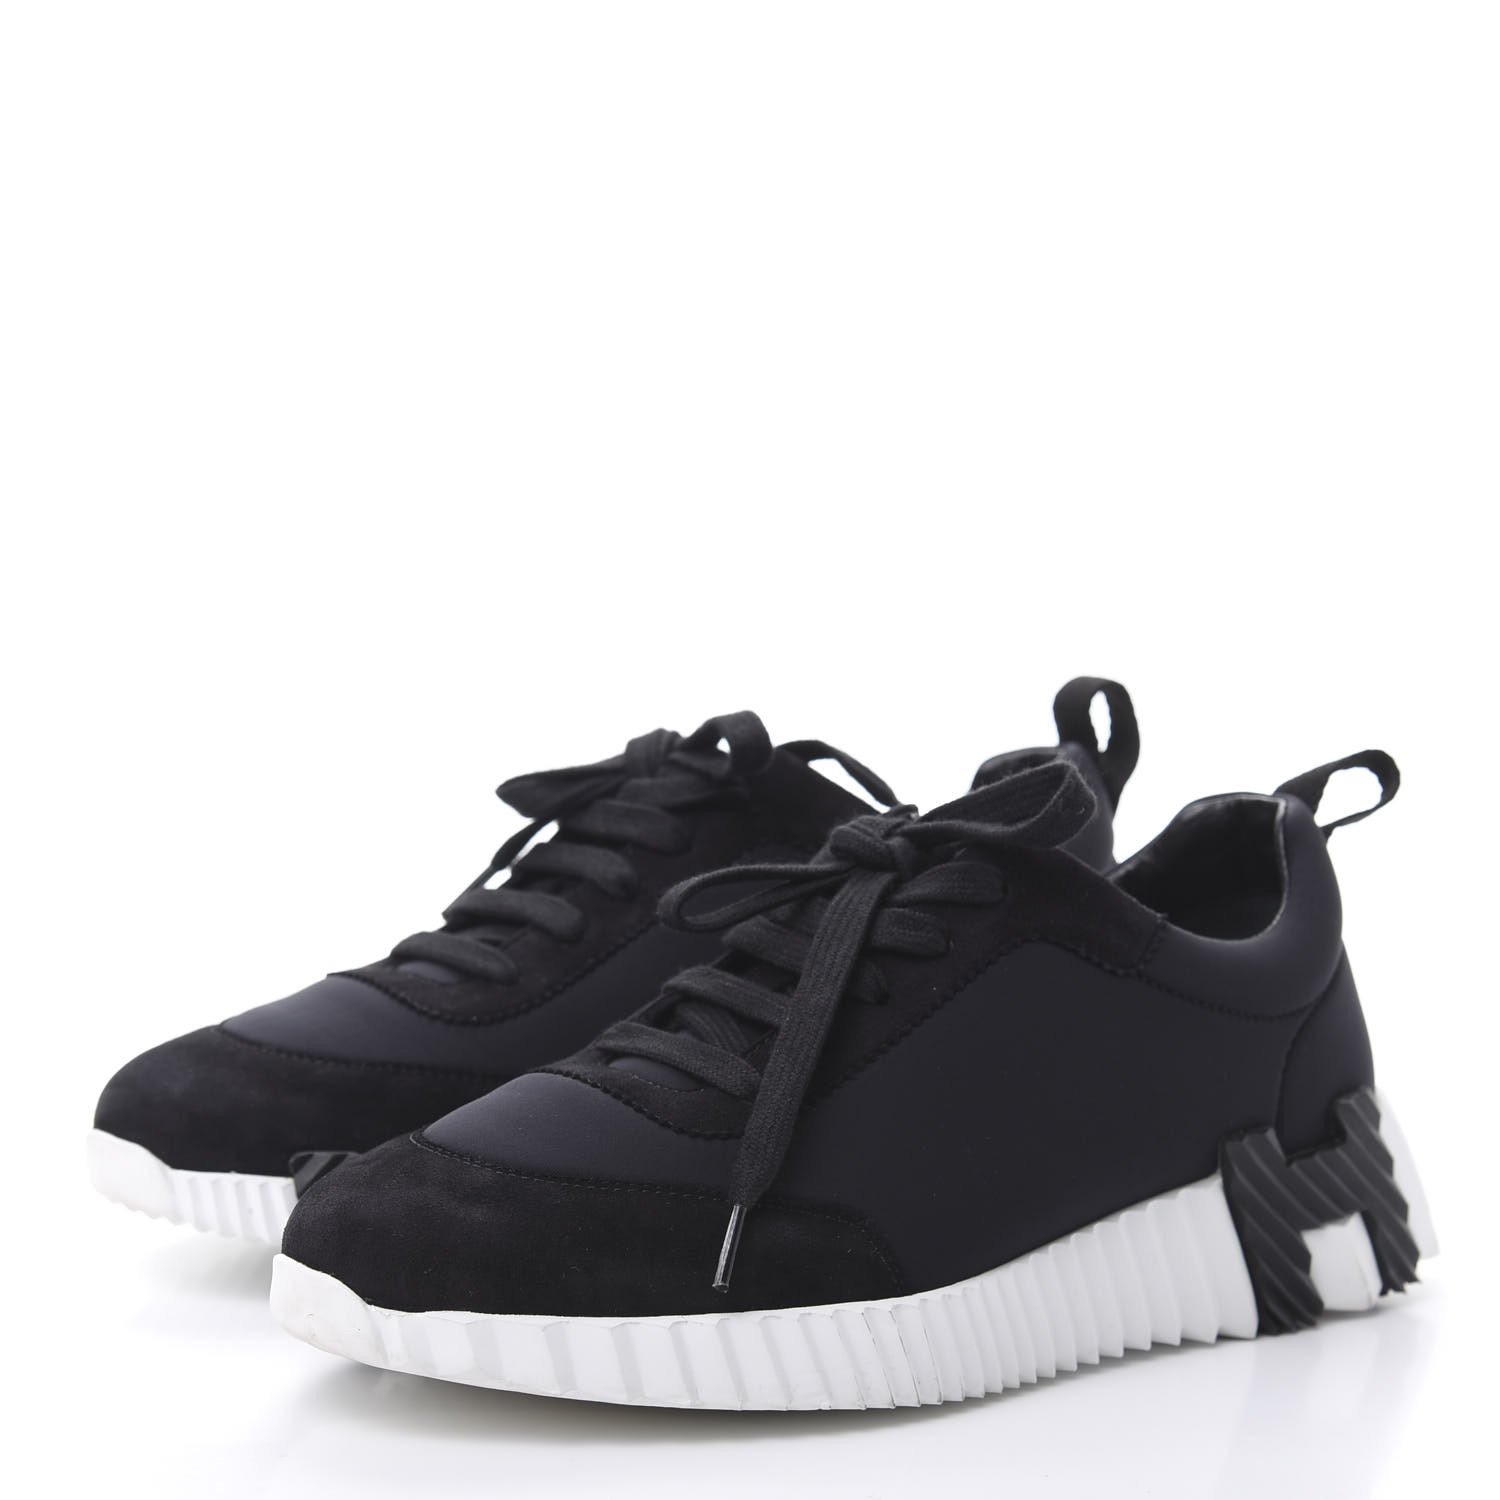 HERMES Technical Canvas Suede Goatskin Bouncing Sneakers 37 Black White ...